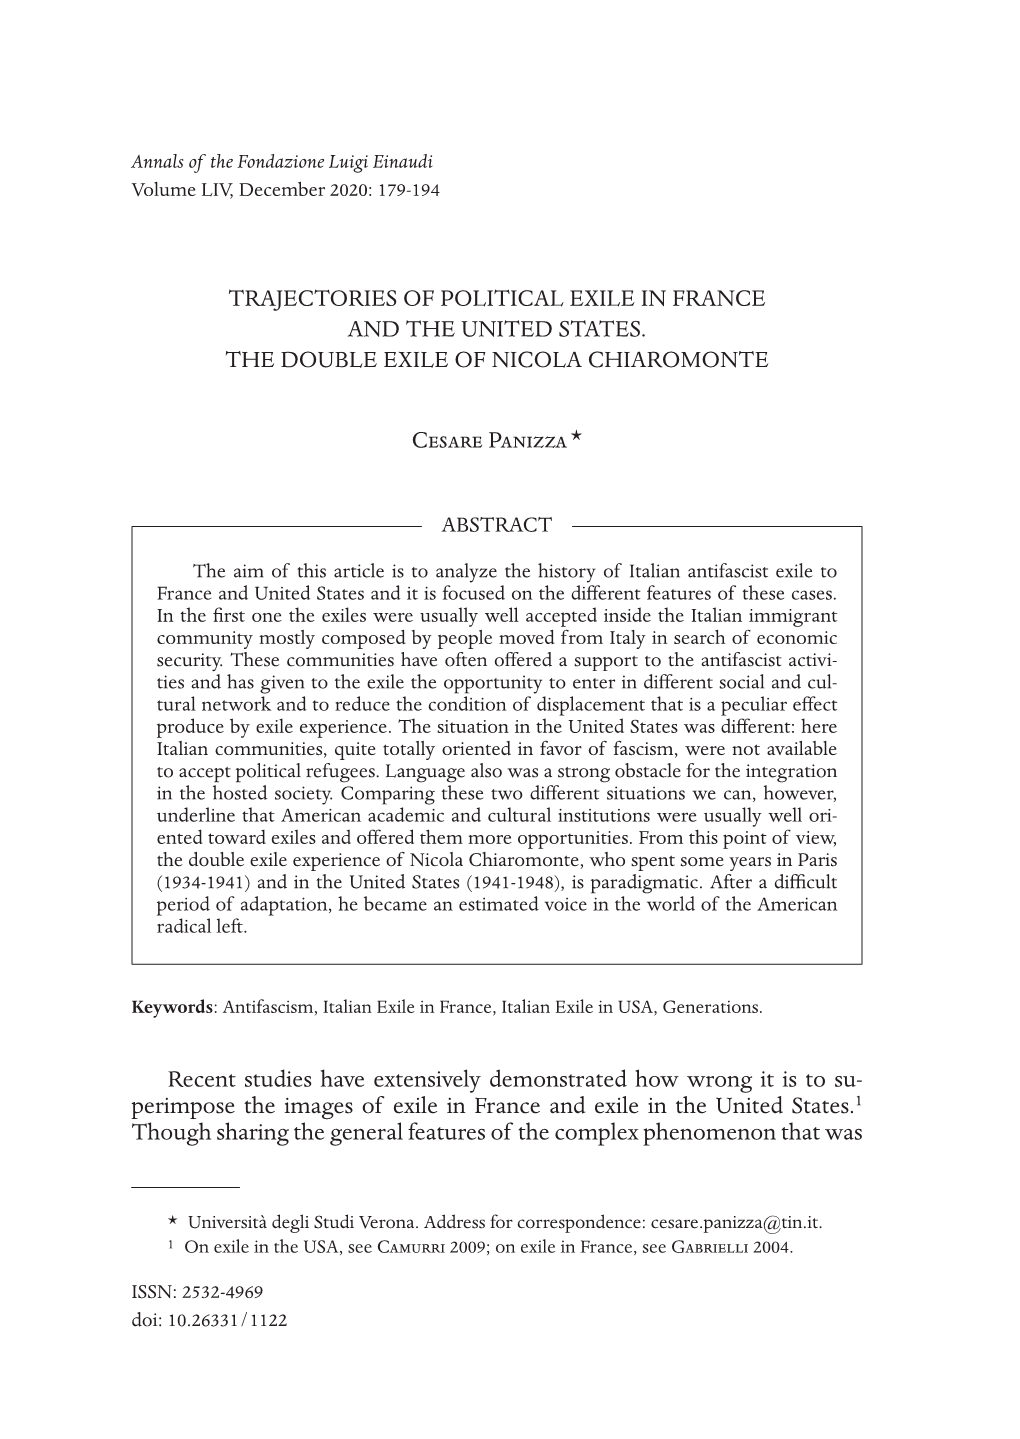 Trajectories of Political Exile in France and the United States